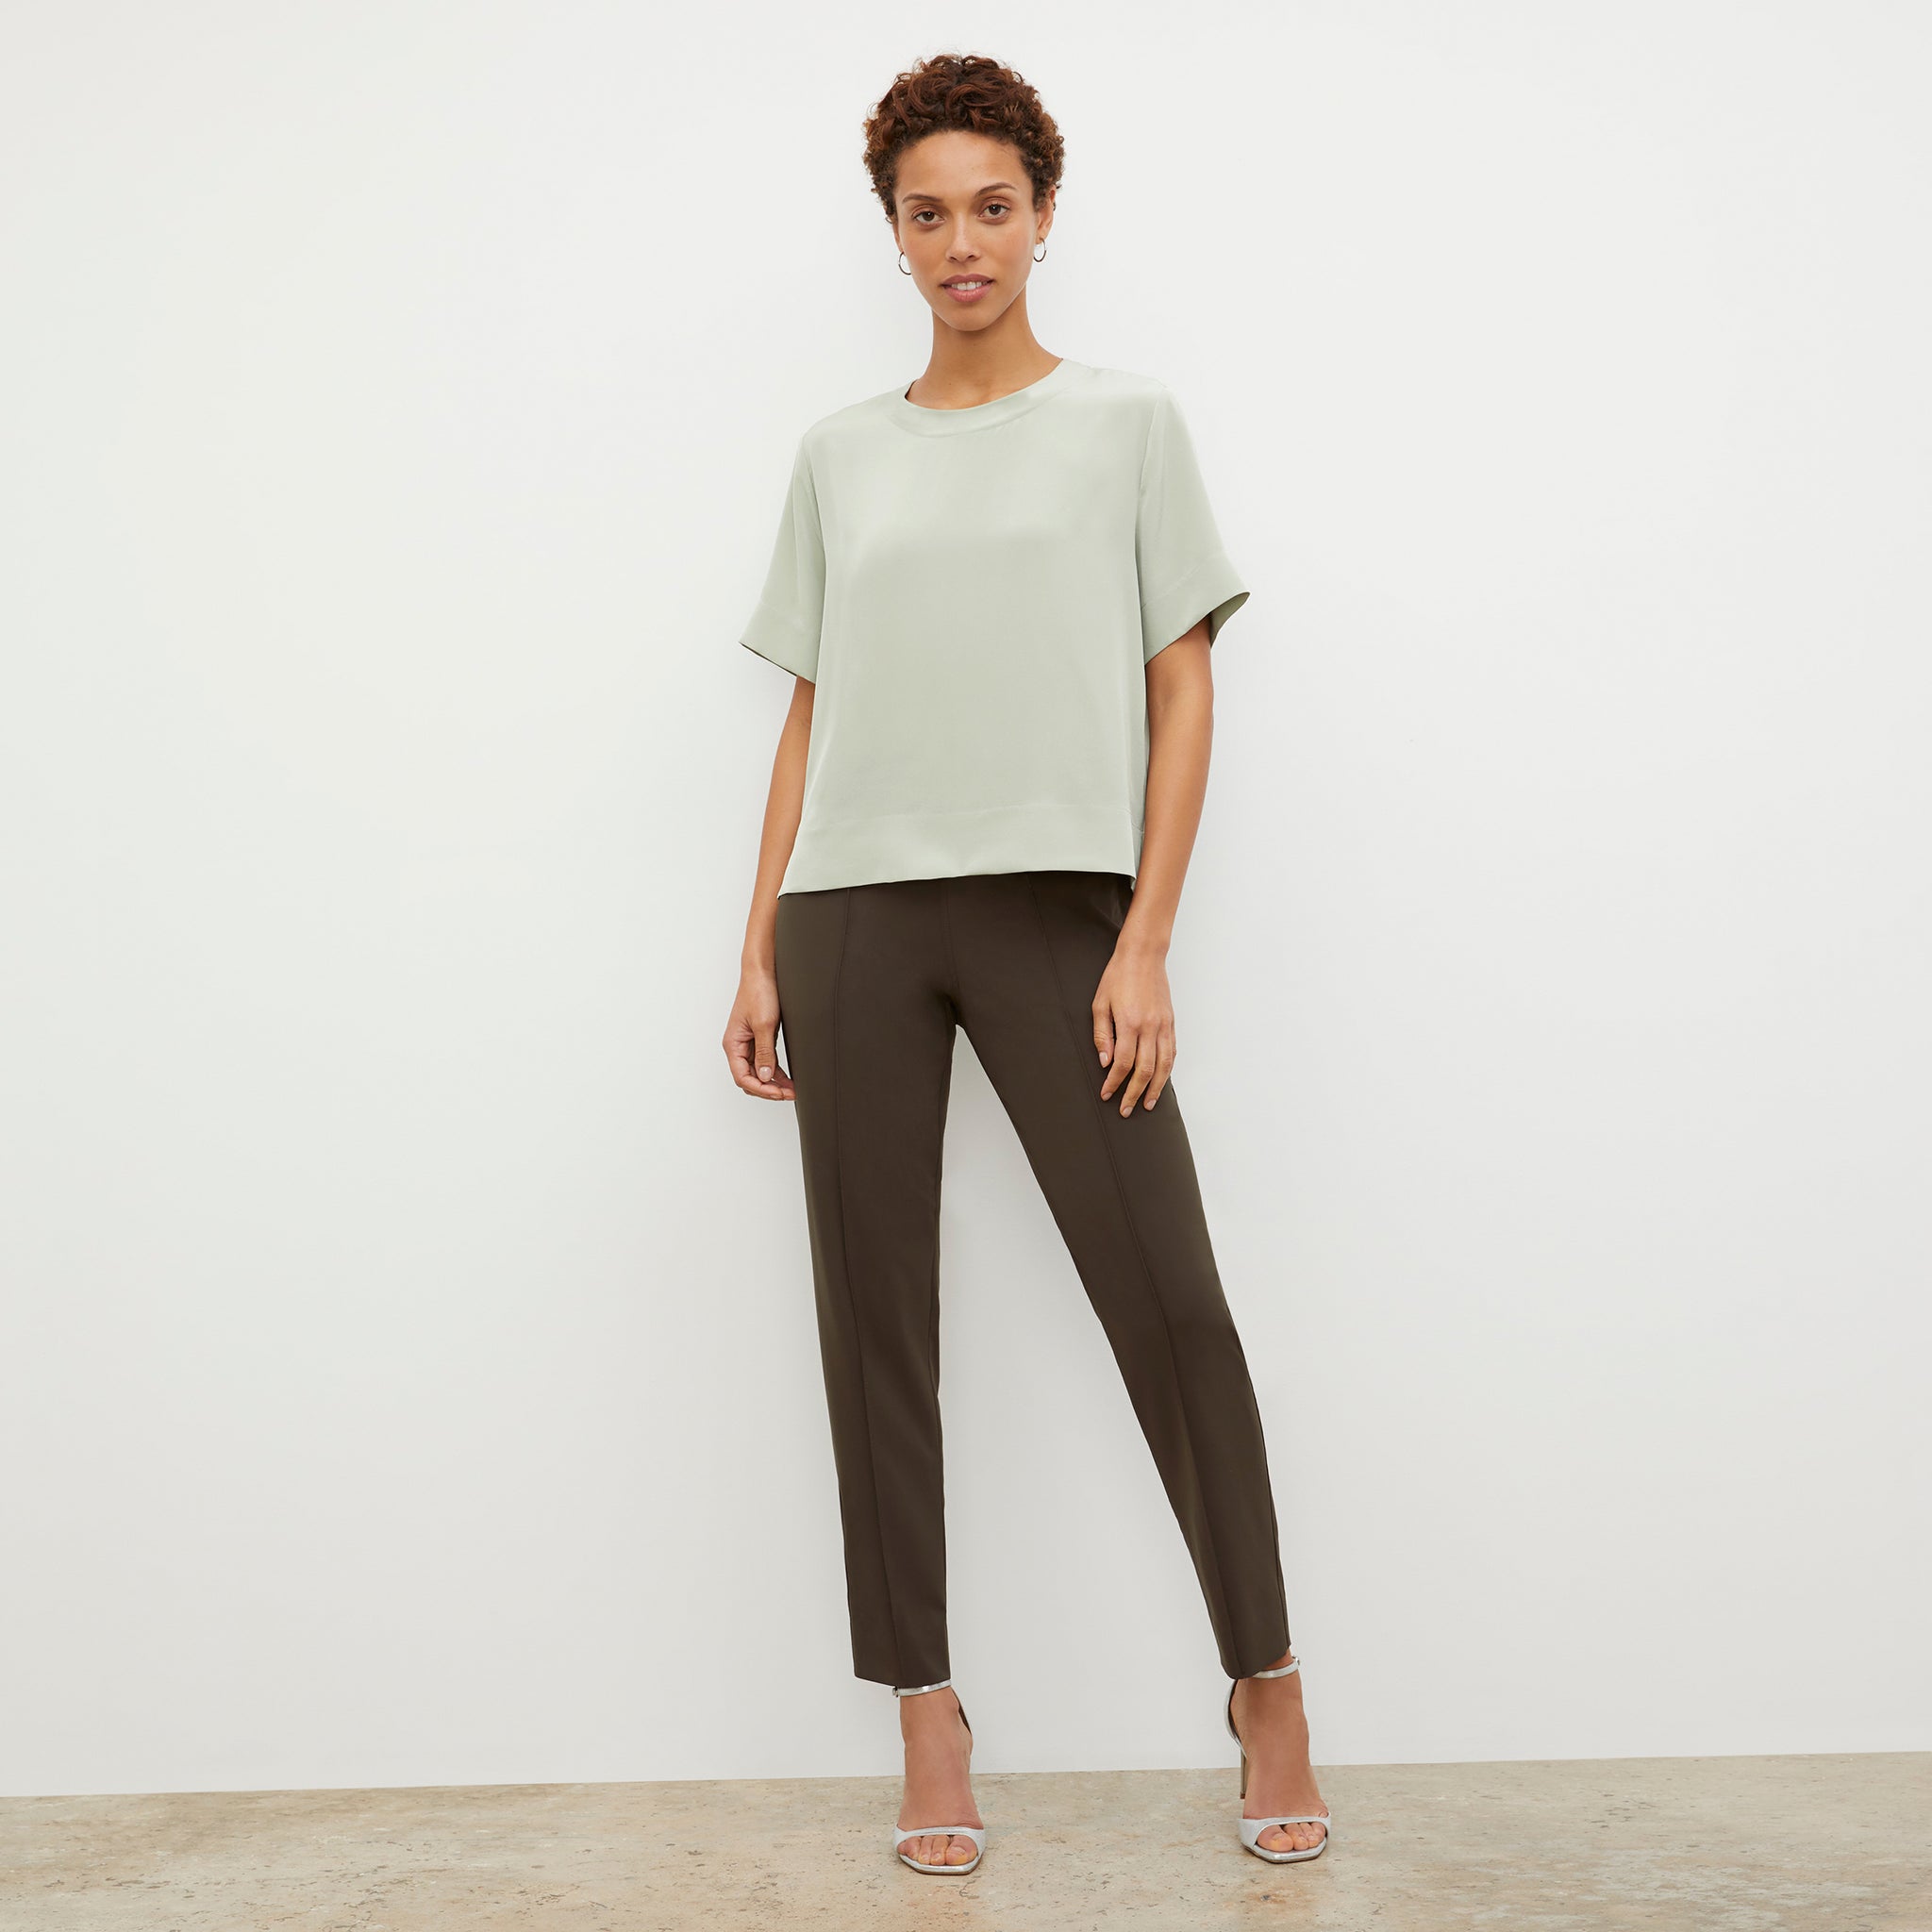 Front image of a woman wearing the Annika Tee in Minty Green 